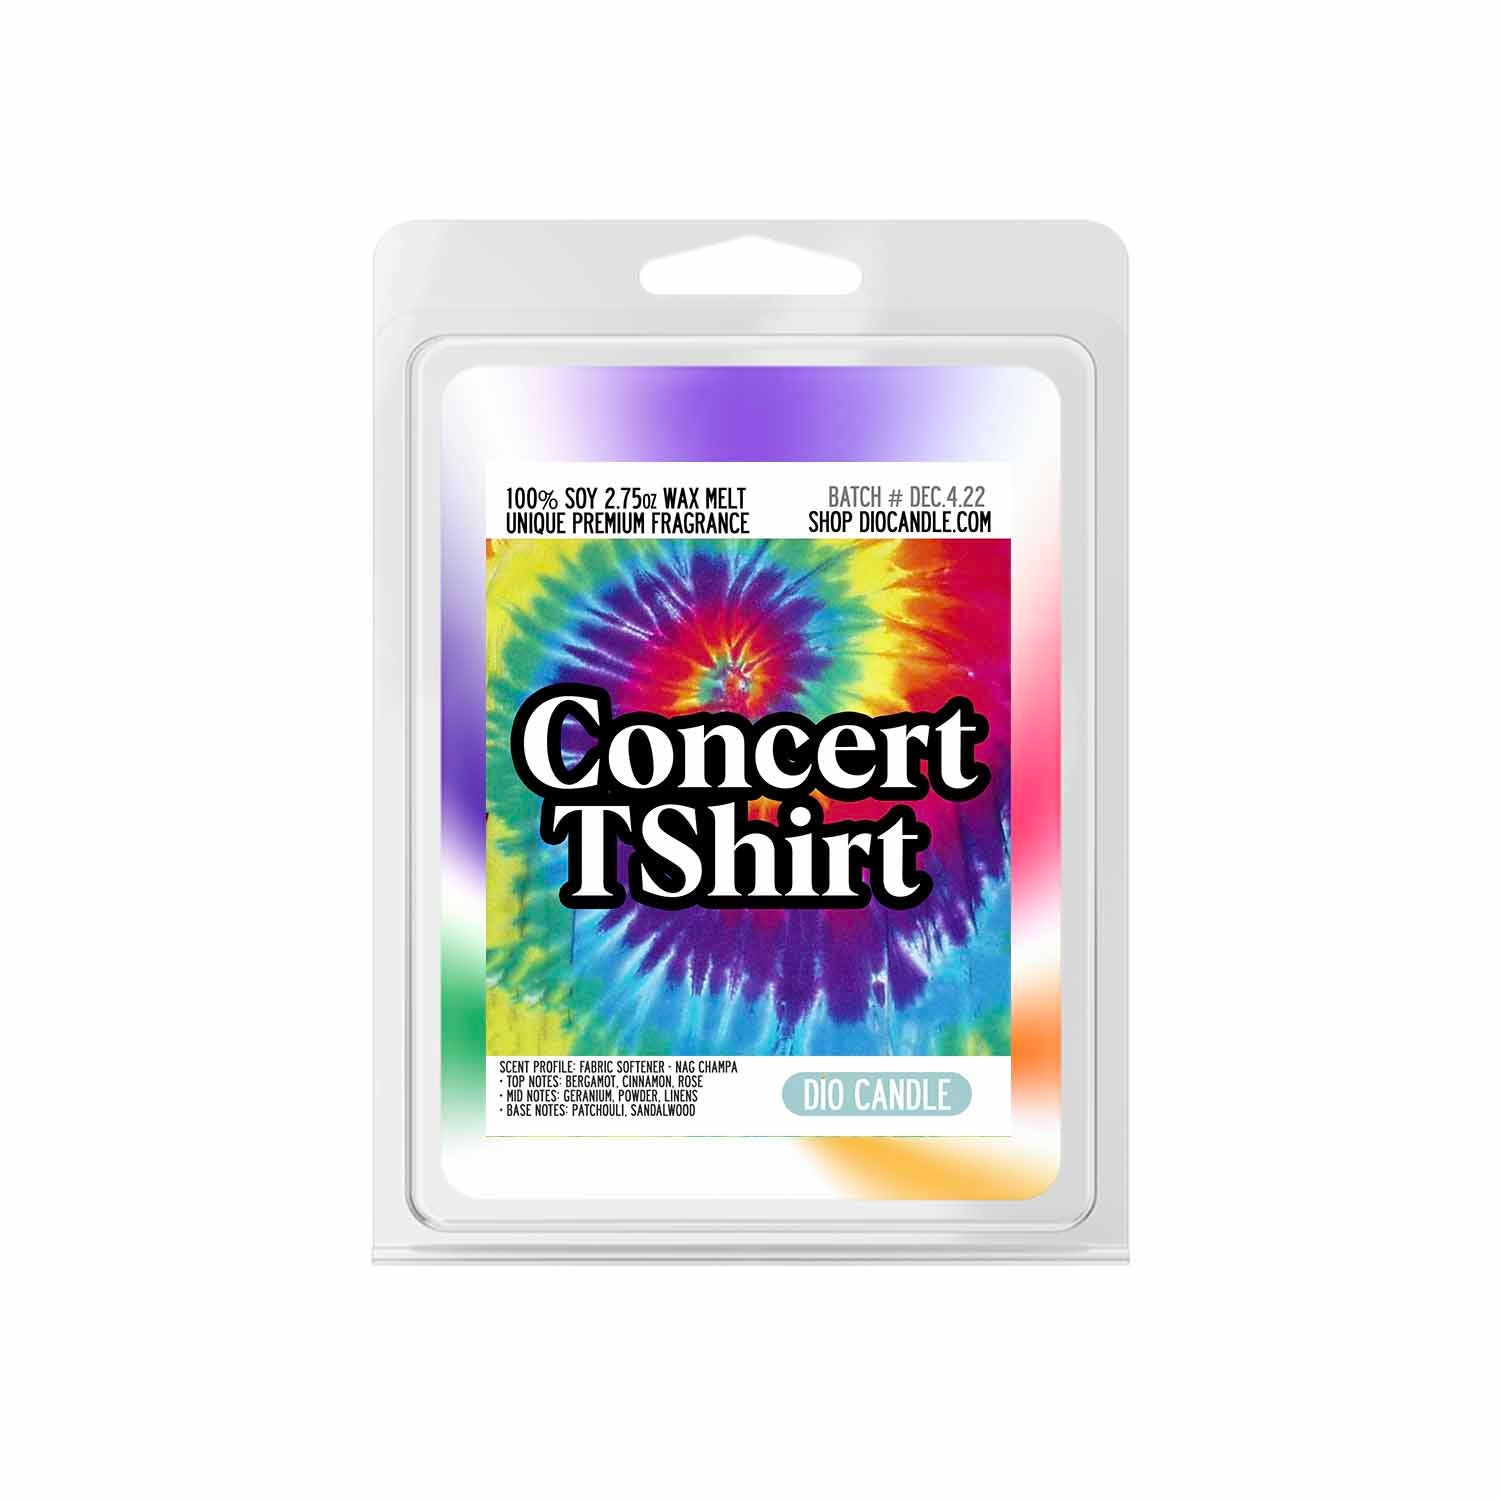 Concert Tee Shirt Candle - Fabric Softener - Nag Champa Scented